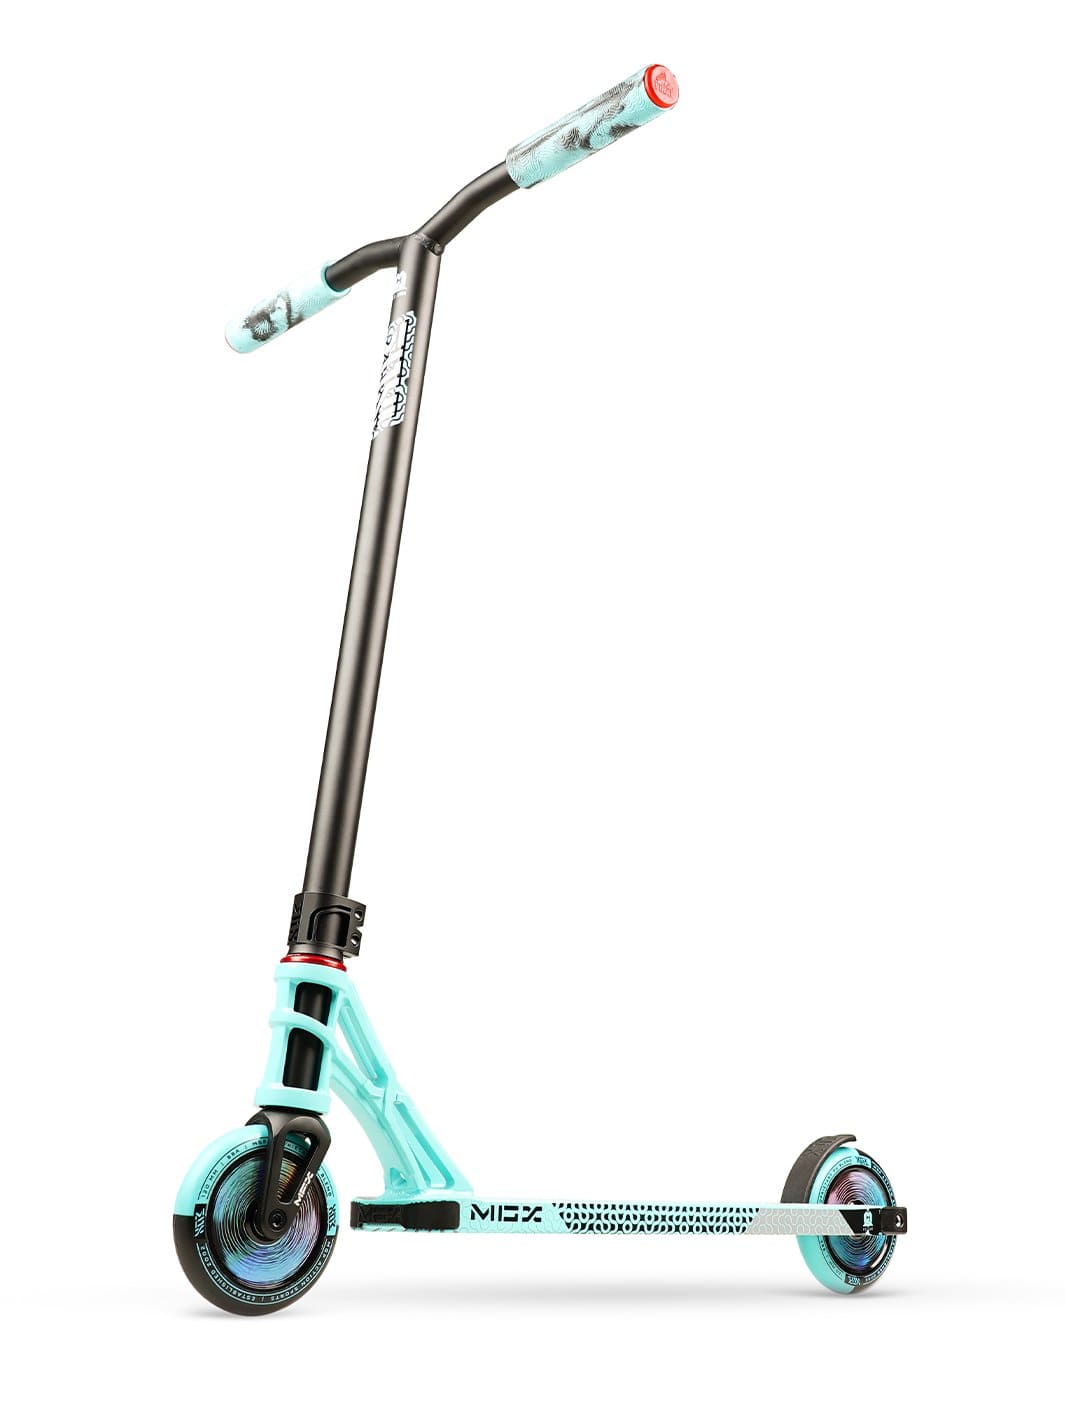 P2 STUNT SCOOTER - TAZE | Teal Black Complete Pro Scooter Madd Gear Global | Est 2002